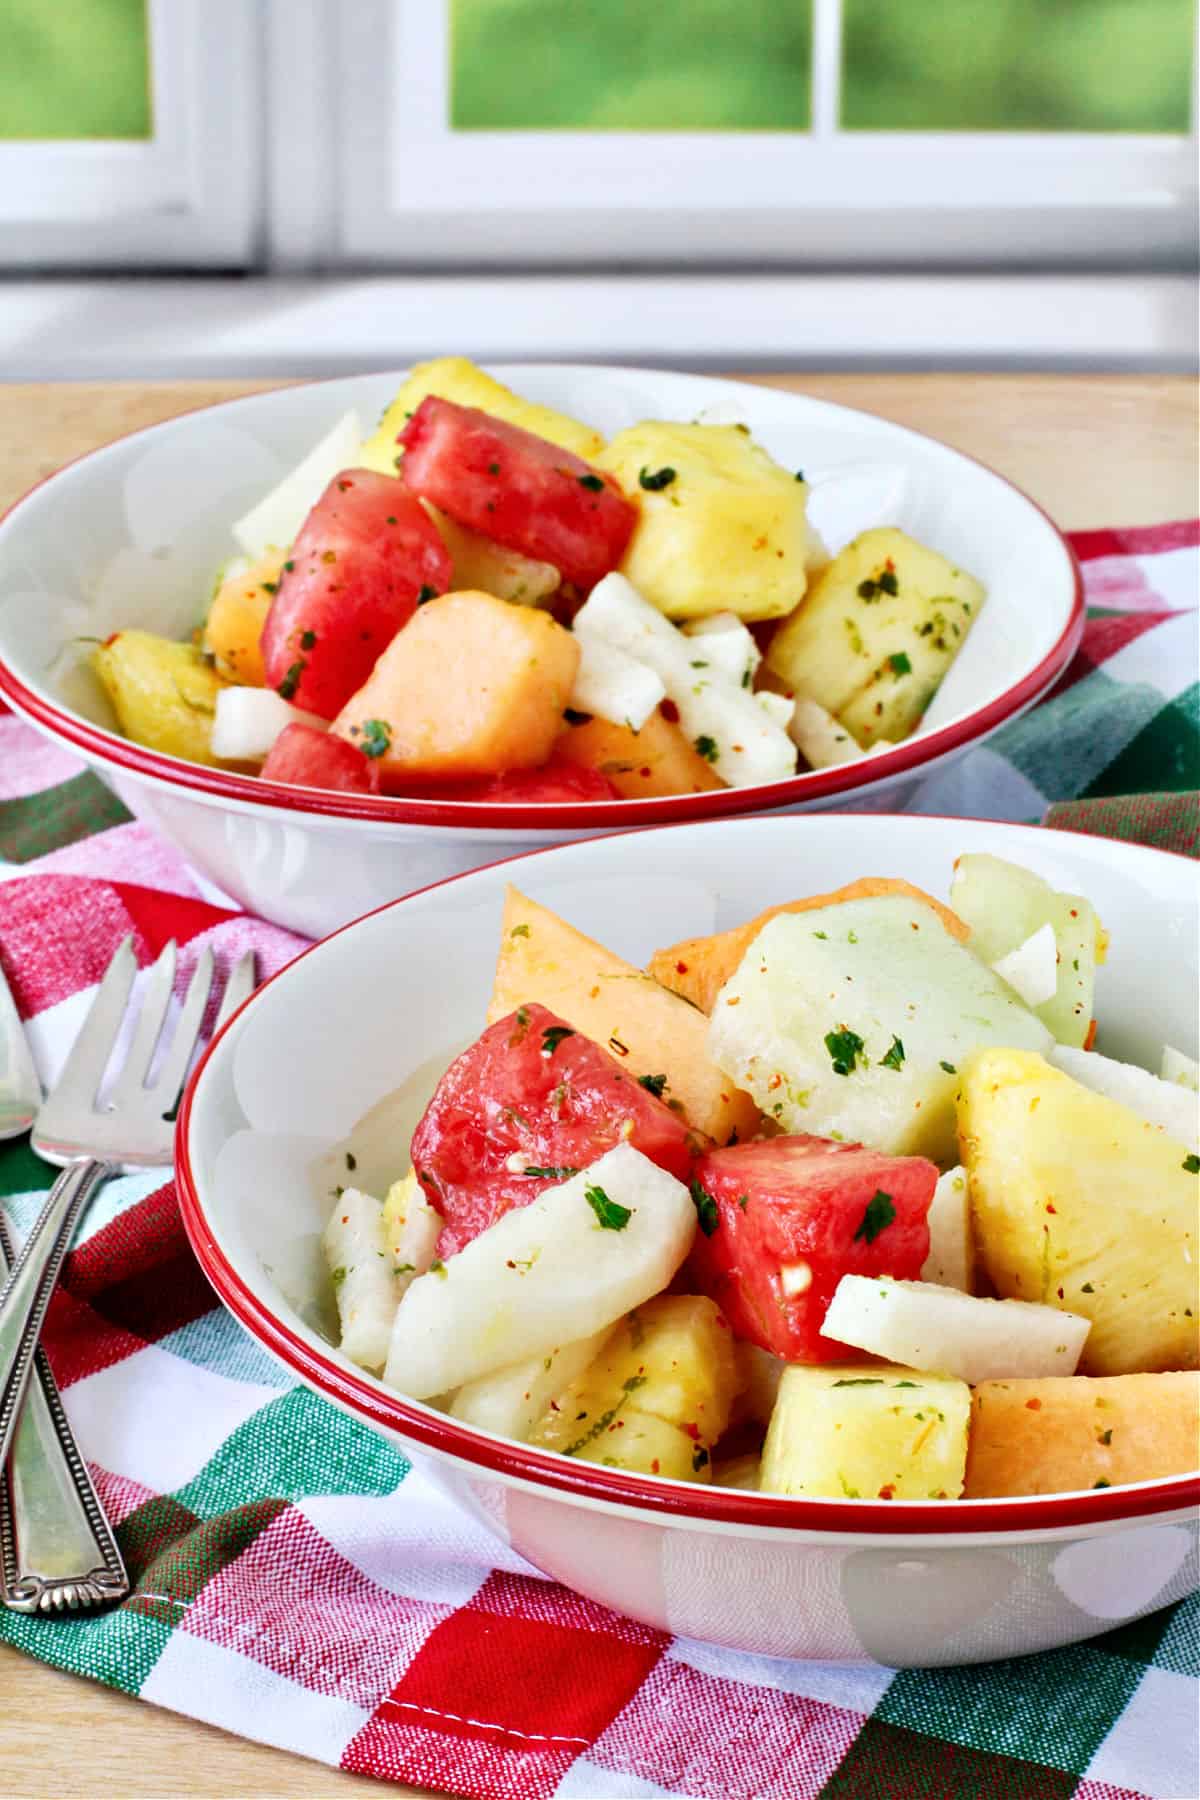 Melon, Jicama, and Pineapple Salad in white red-rimmed bowls.